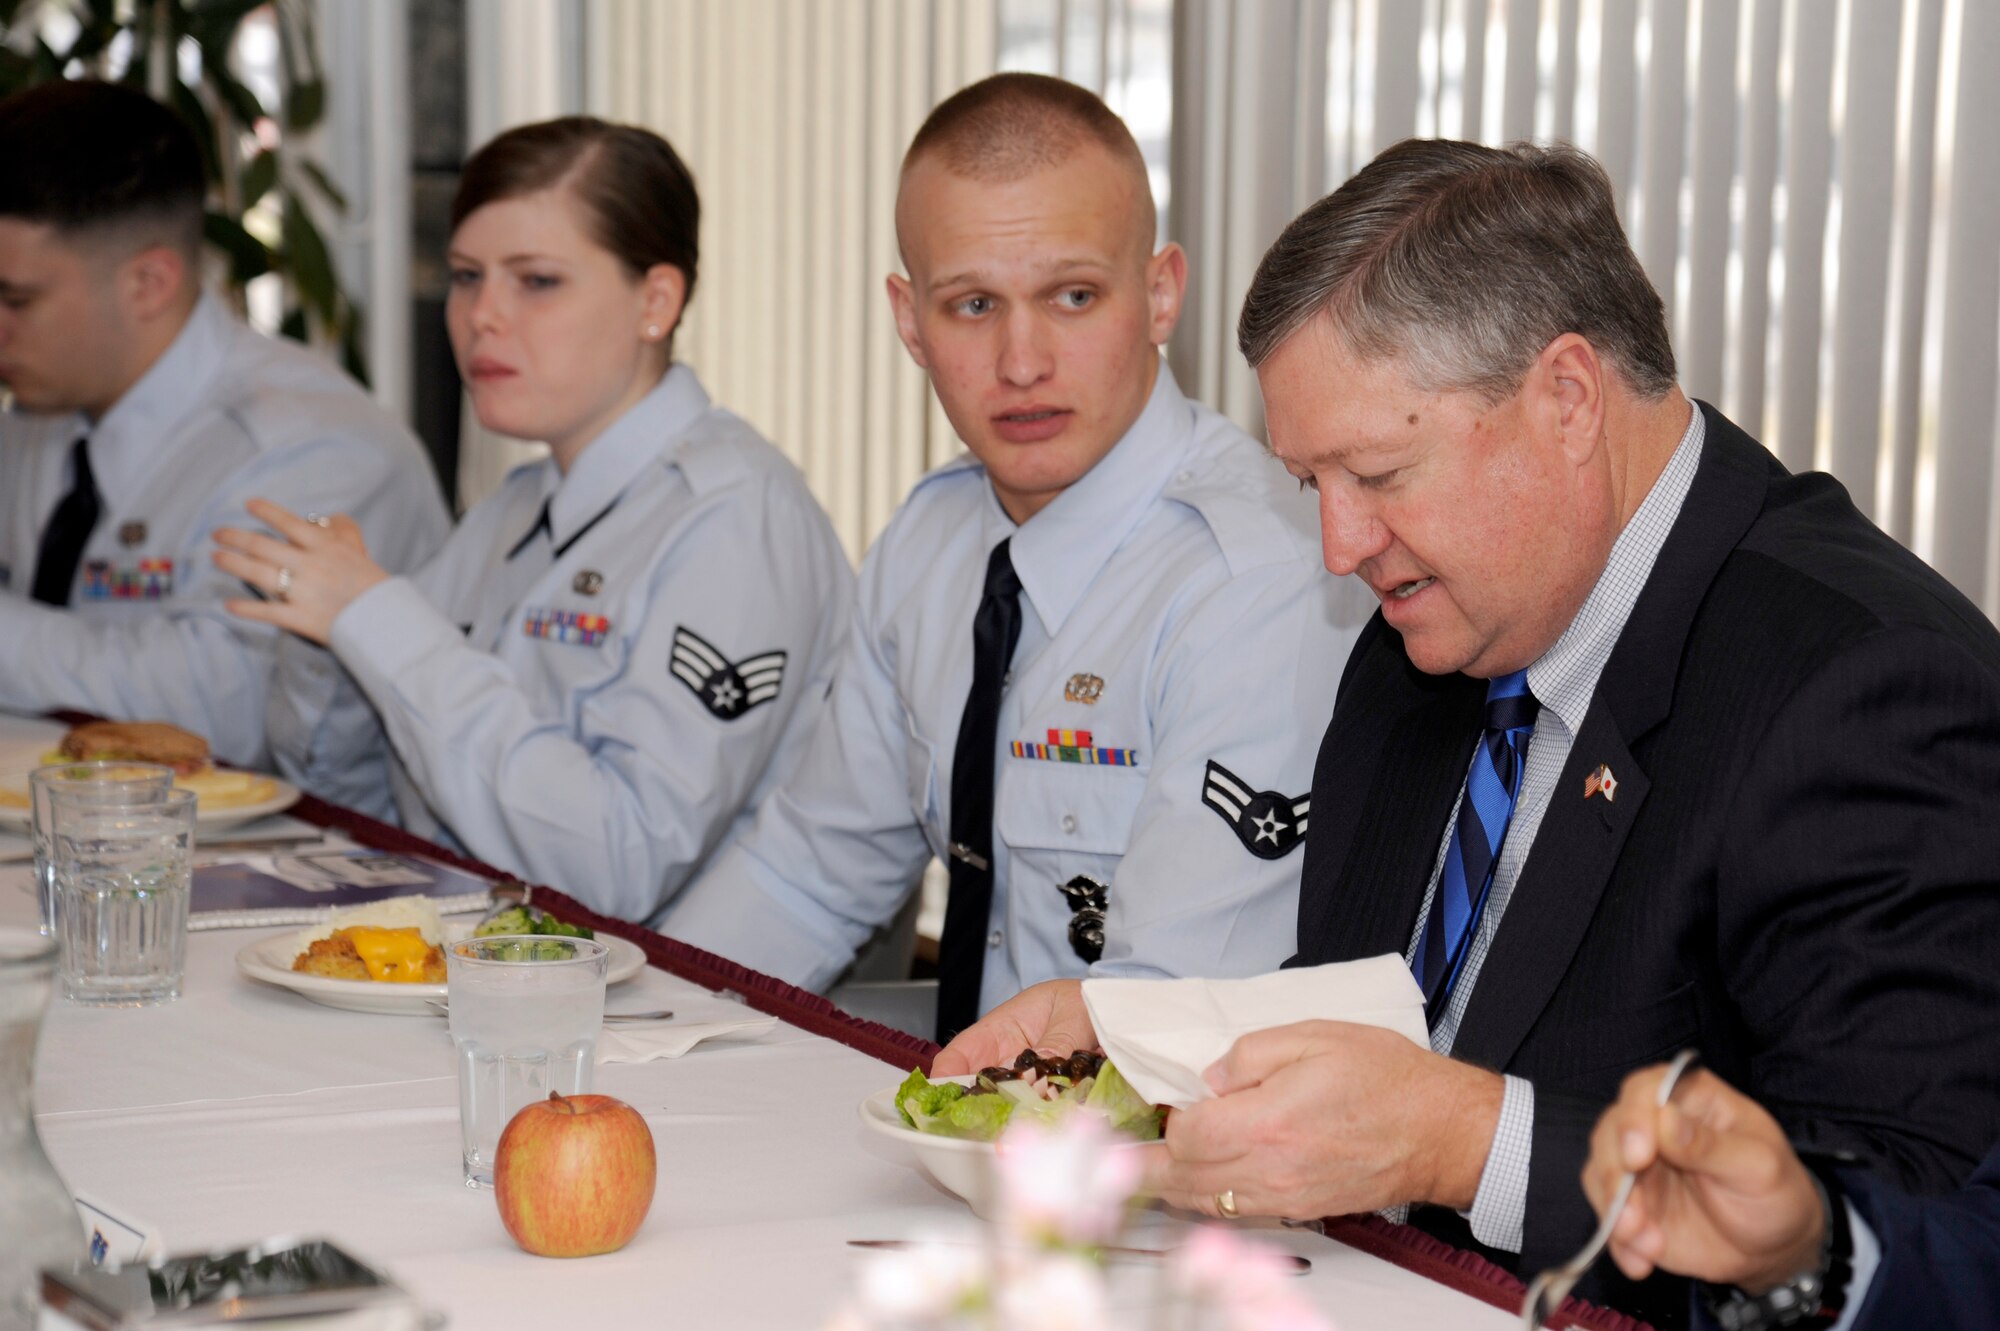 Secretary of the Air Force Michael Donley talks with Airmen during lunch at the Grissom Dining Facility at Misawa Air Base, Japan, April 23, 2012. Approximately 11 Airmen shared a meal with the secretary and asked questions regarding funding and the future of the Air Force. During his visit to Misawa, Donley met with Airmen and toured various base facilities. (U.S. Air Force photo/Tech. Sgt. Marie Brown/Released)

